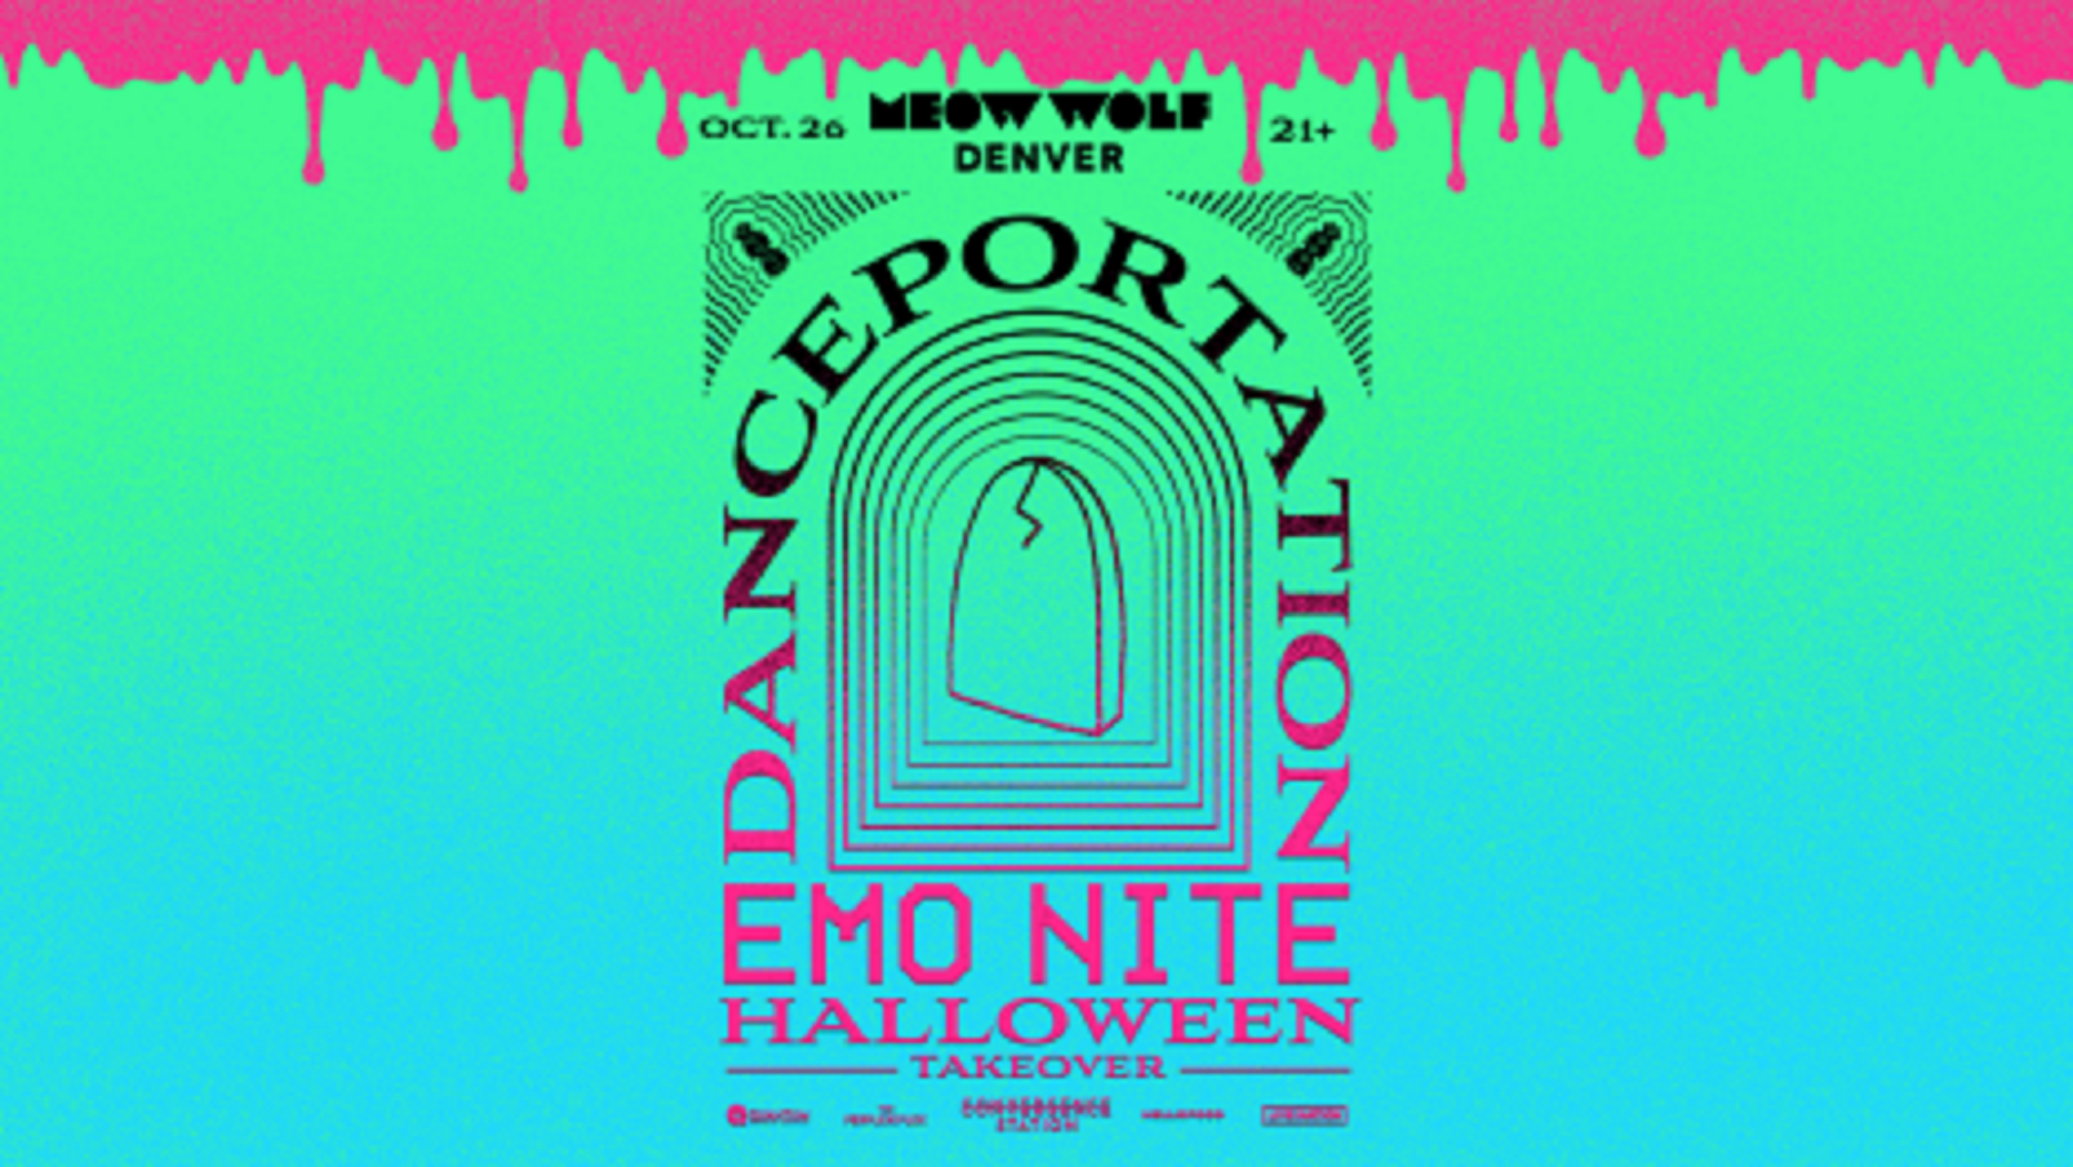 Emo Nite Joins Forces with Meow Wolf Denver for Danceportation: Halloween Emo Nite Takeover